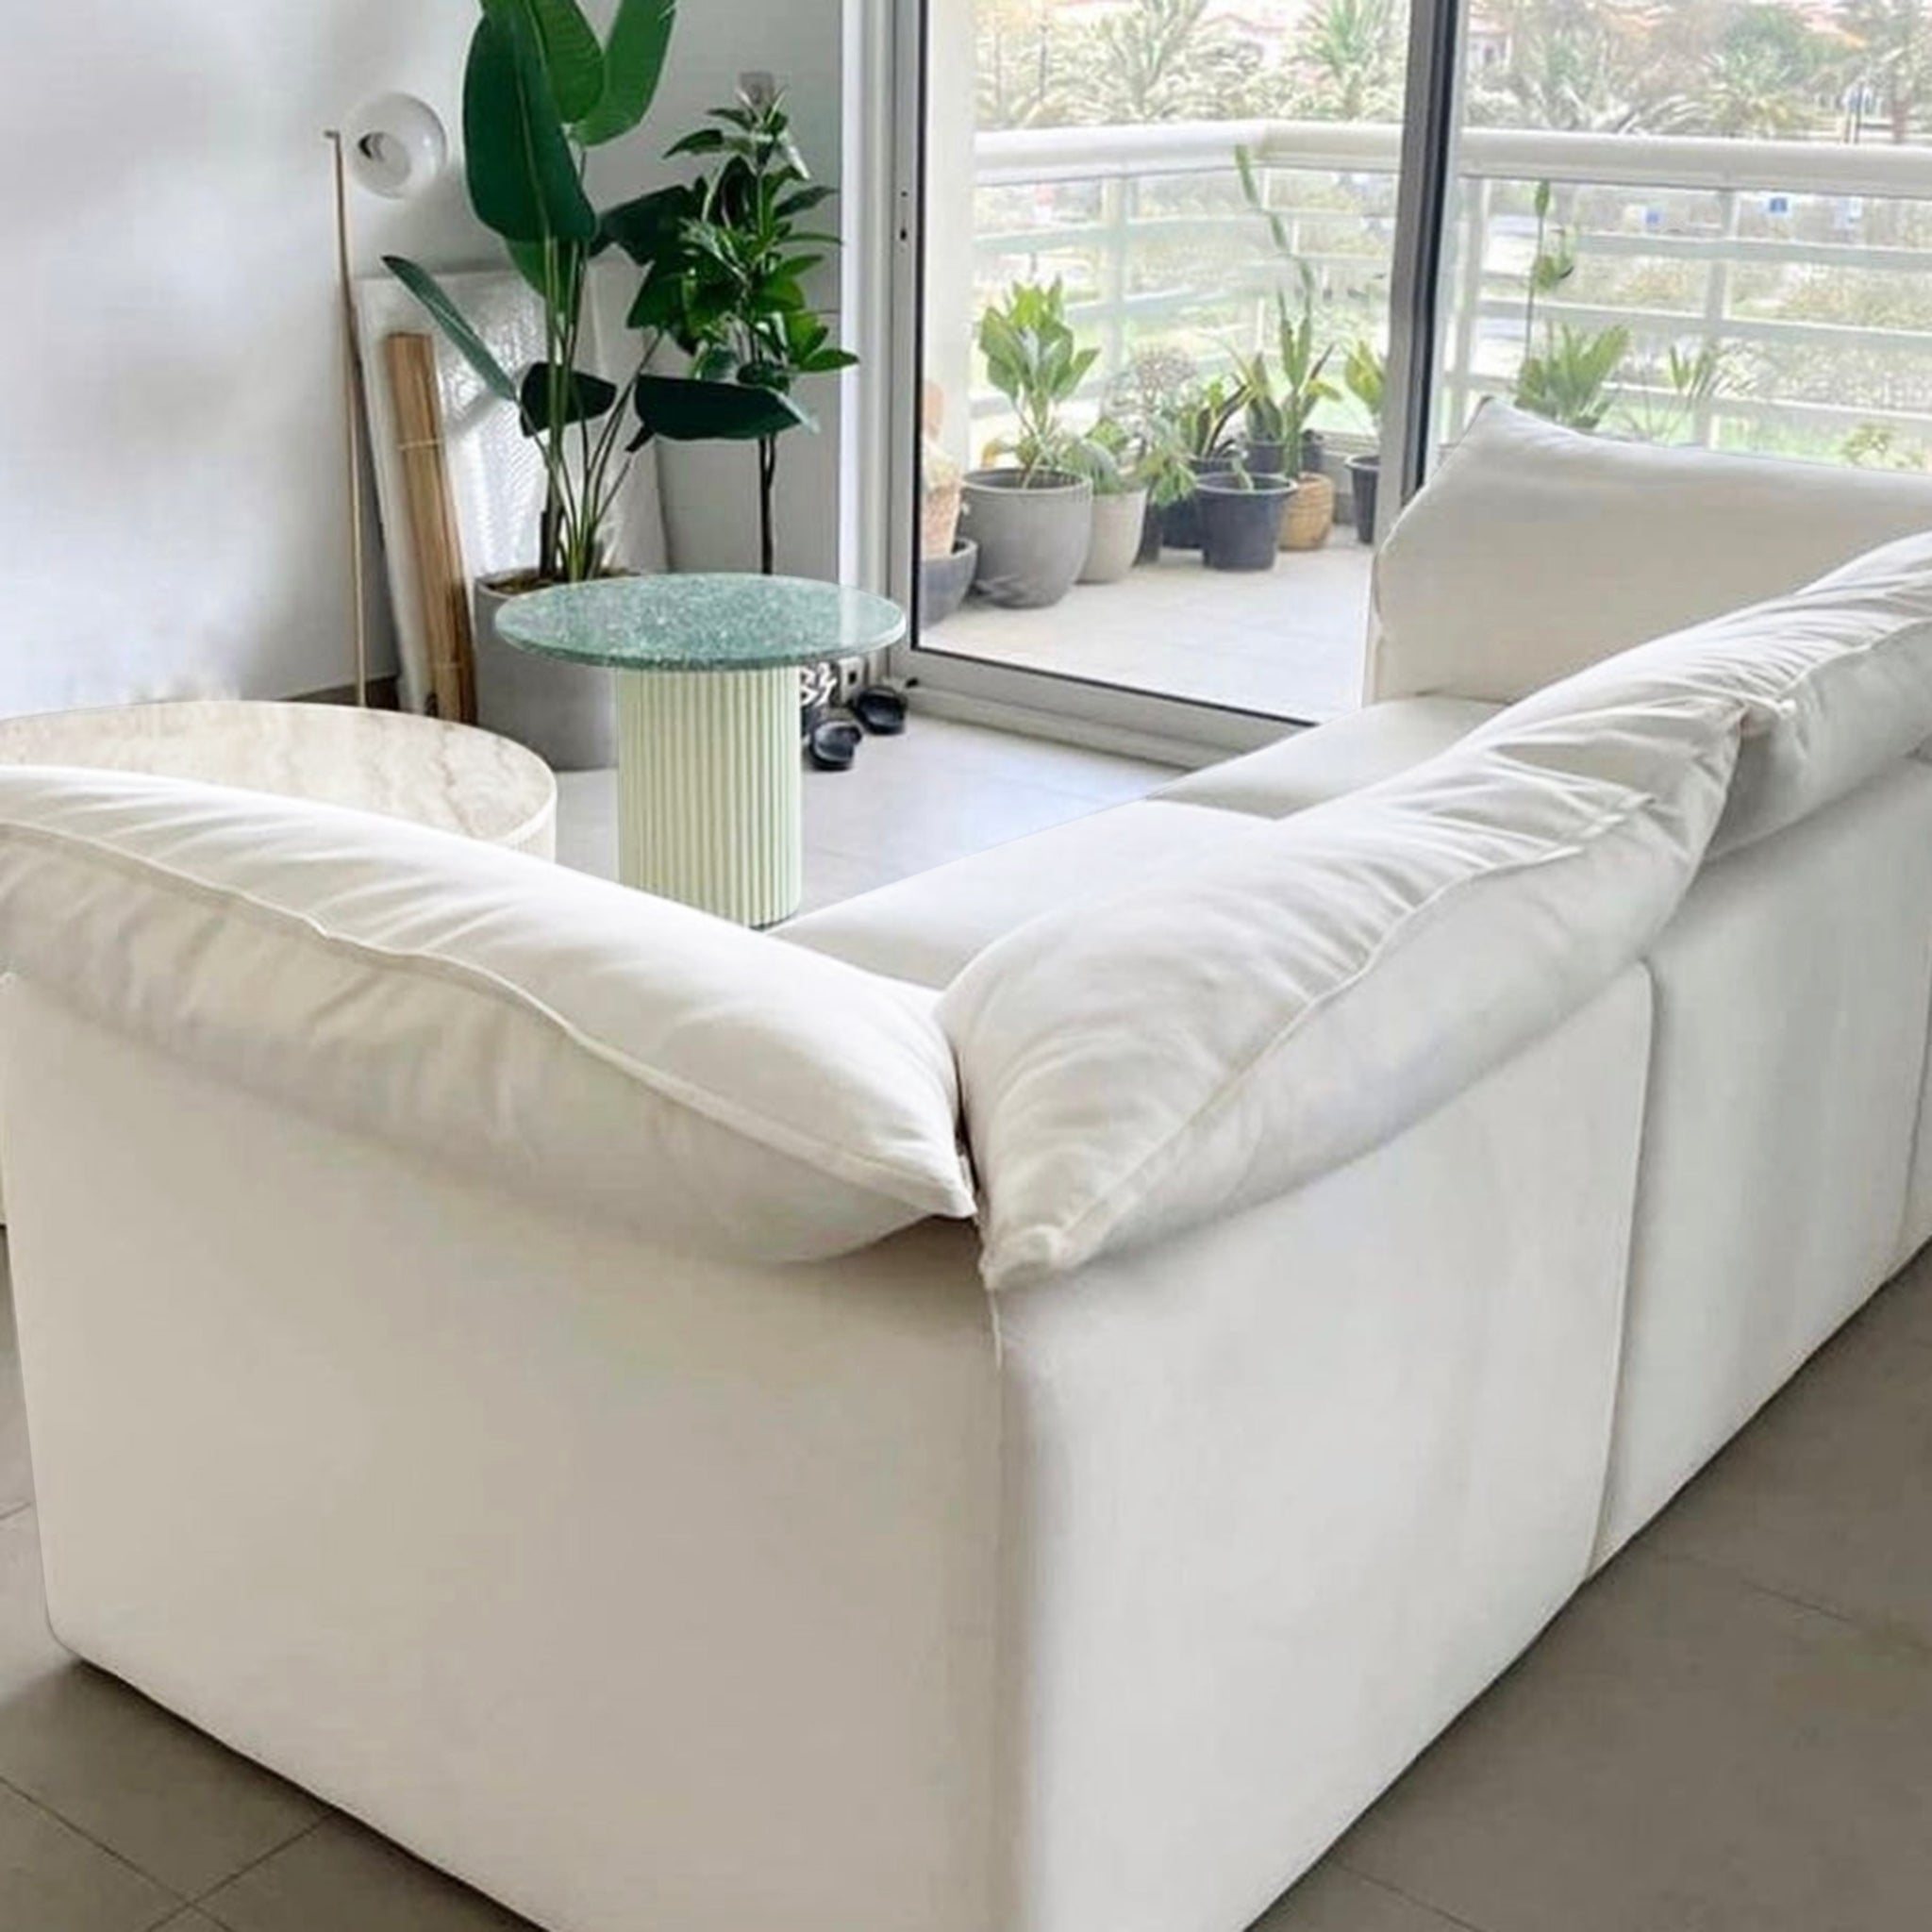 Elegant white sofa in a contemporary living room with large windows leading to a balcony adorned with potted plants.